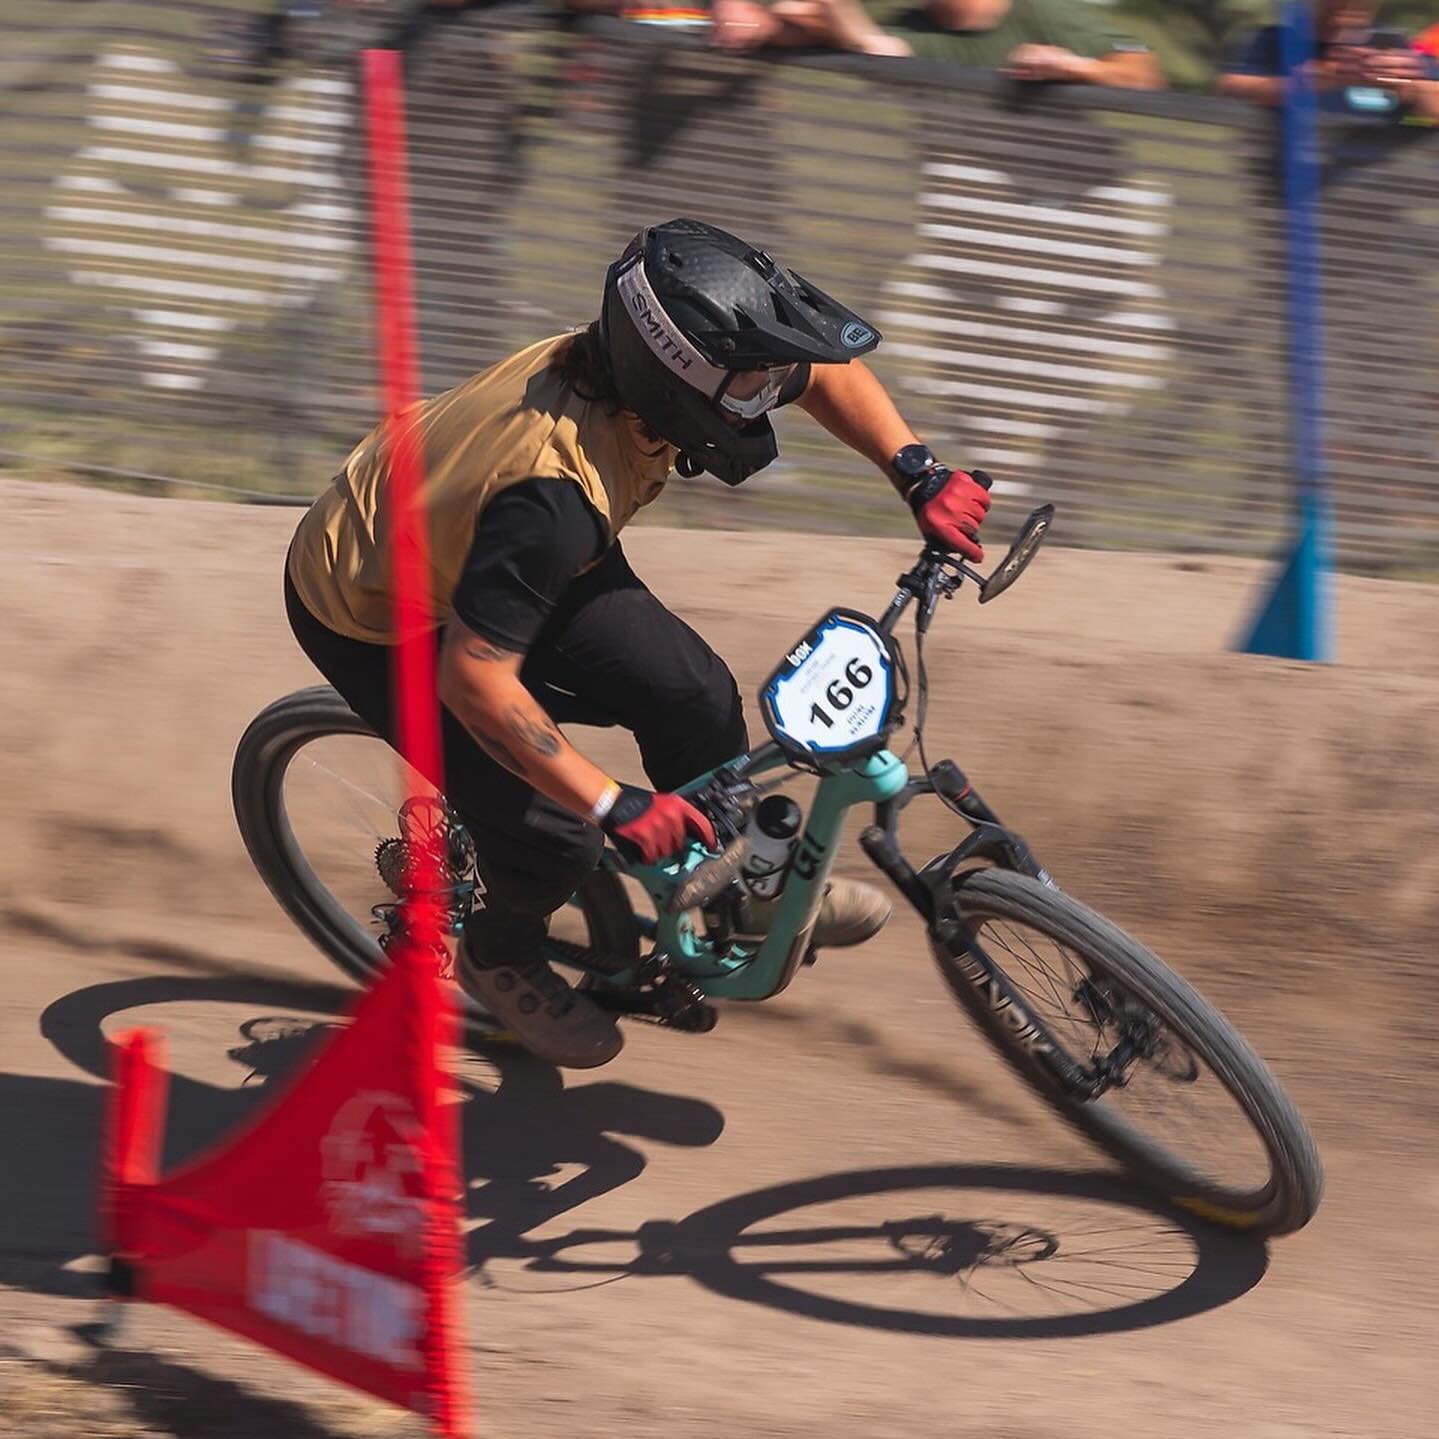 Fun few days at @seaotterclassic hanging with the @mikesbikesenduro @bayareabikeproject @wheelkidswc crews. Been almost a decade since I was back. Snapped @eric_rolf @wygaerts.bike and @justin_niemi throwing down on their @gtbicycles! Congrats to @ju